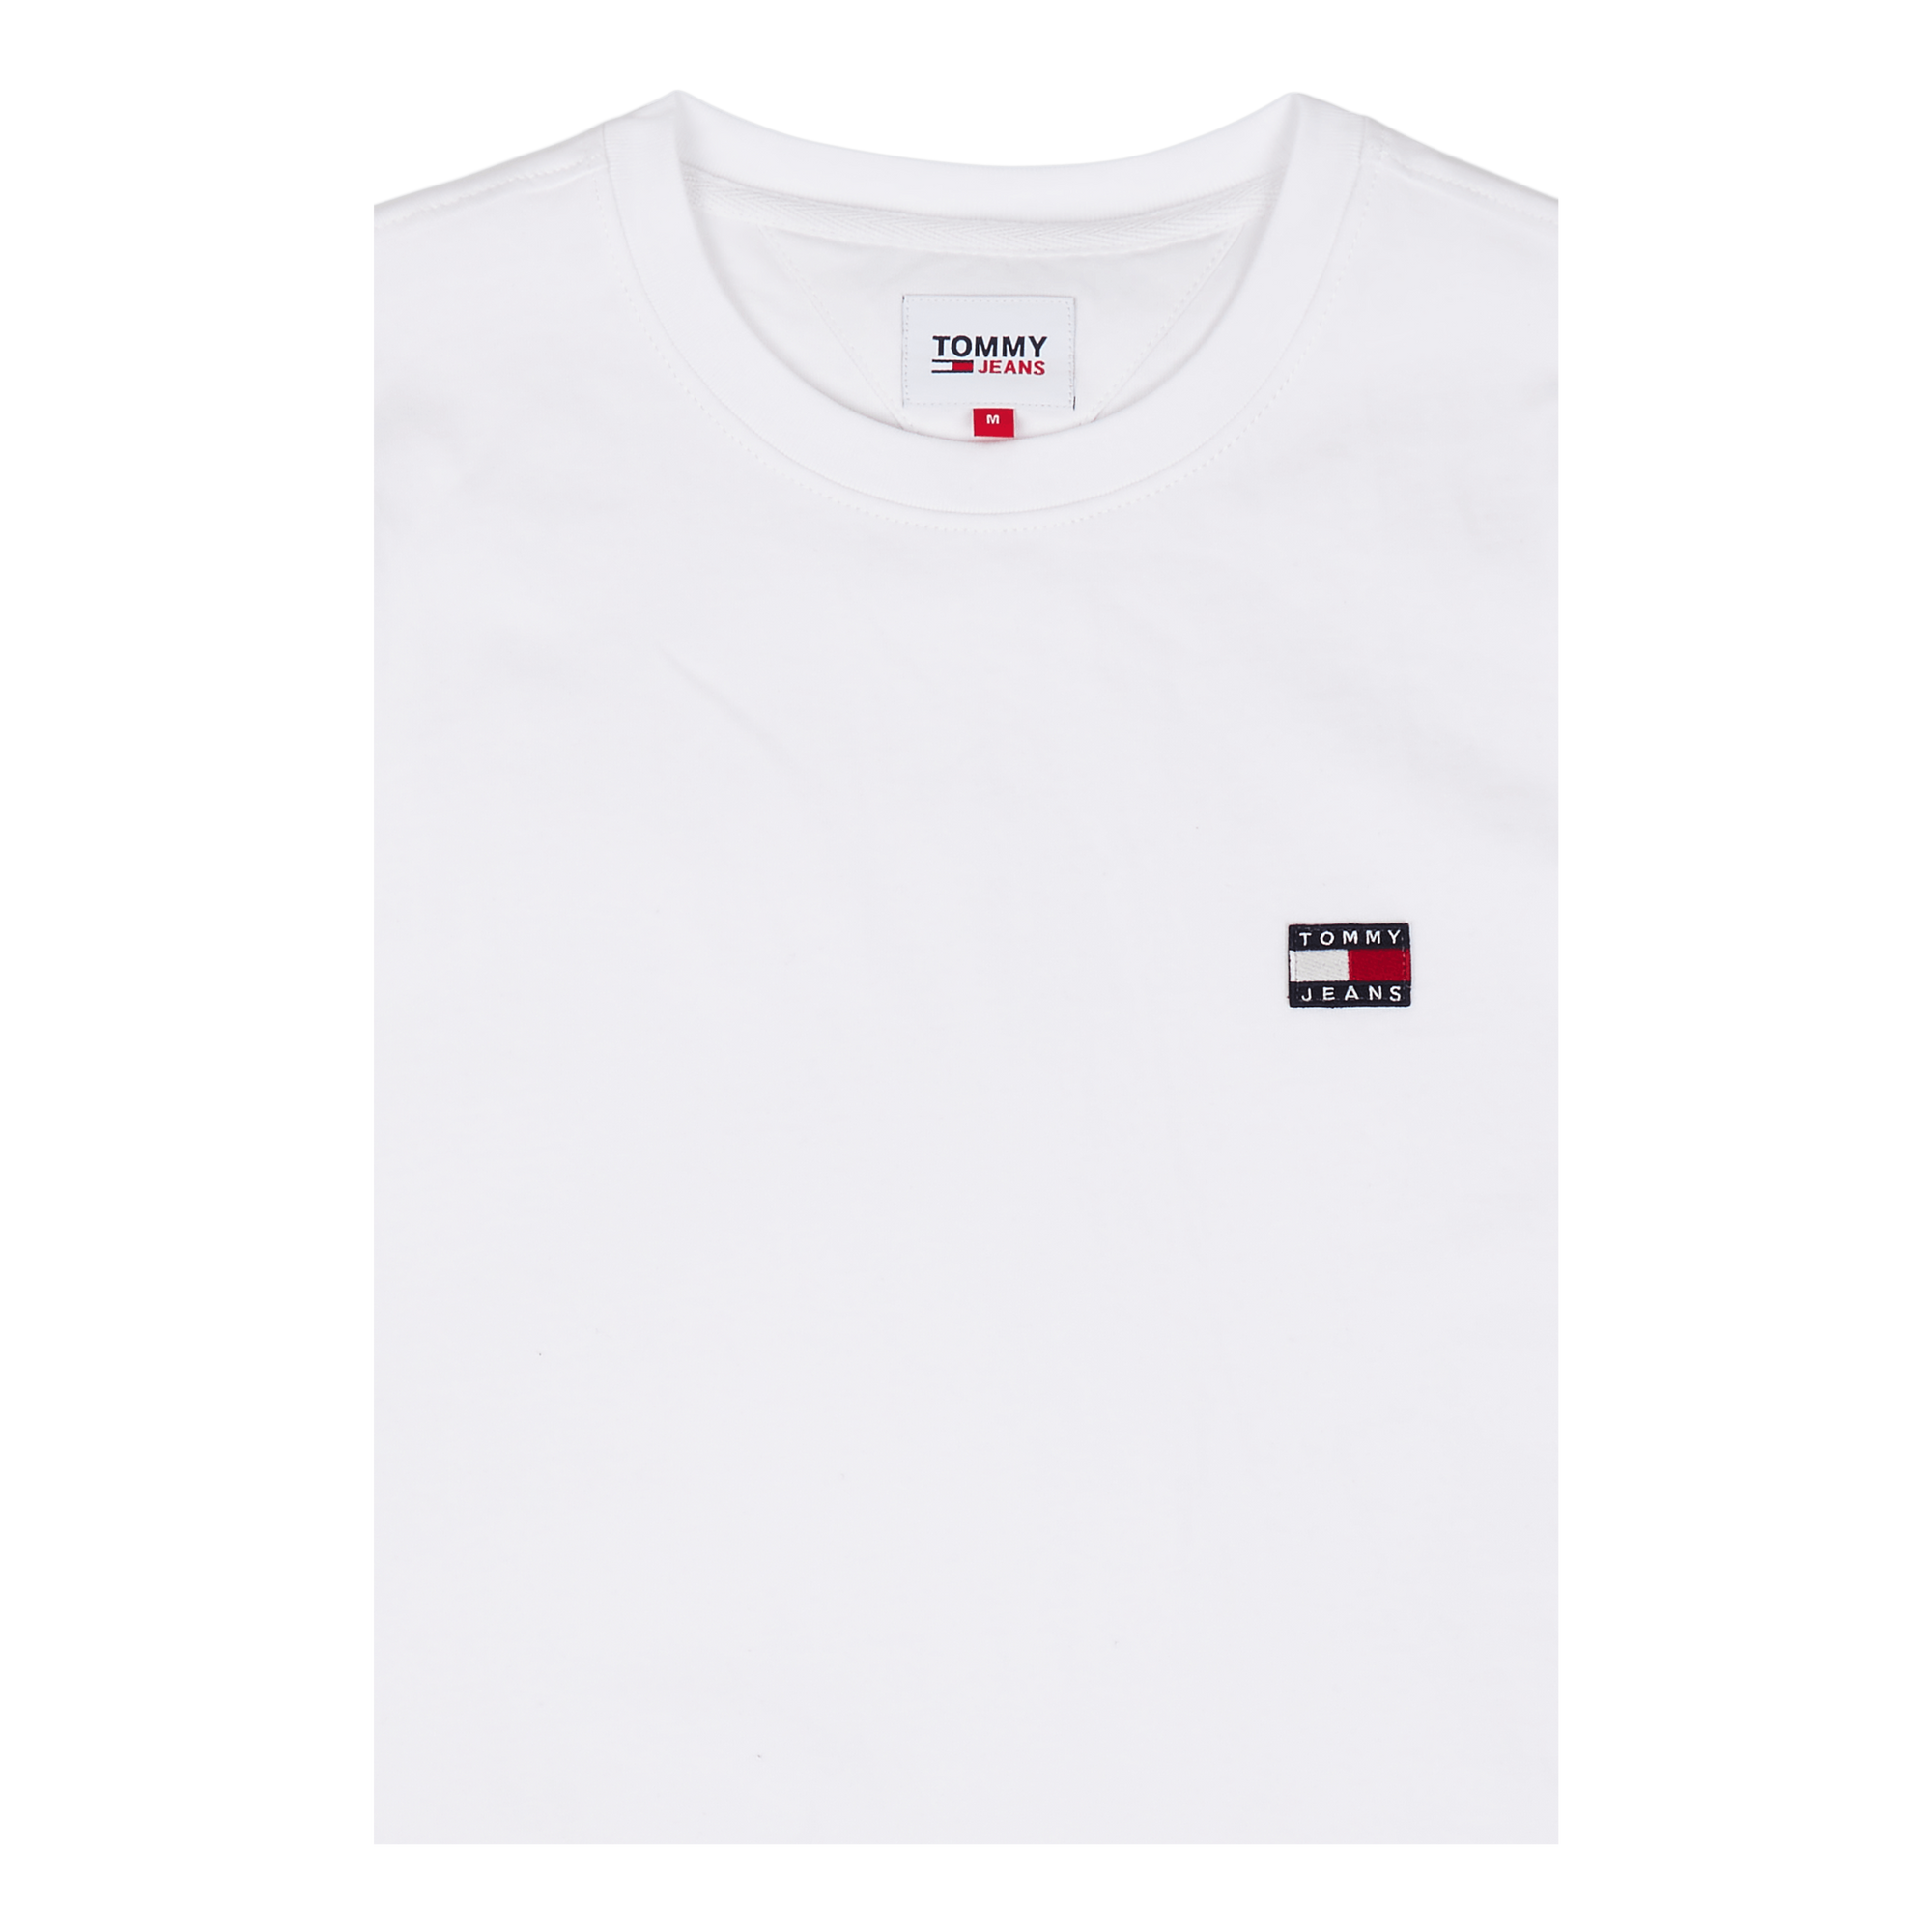 Tjm Clsc Tommy Xs Badge Tee White